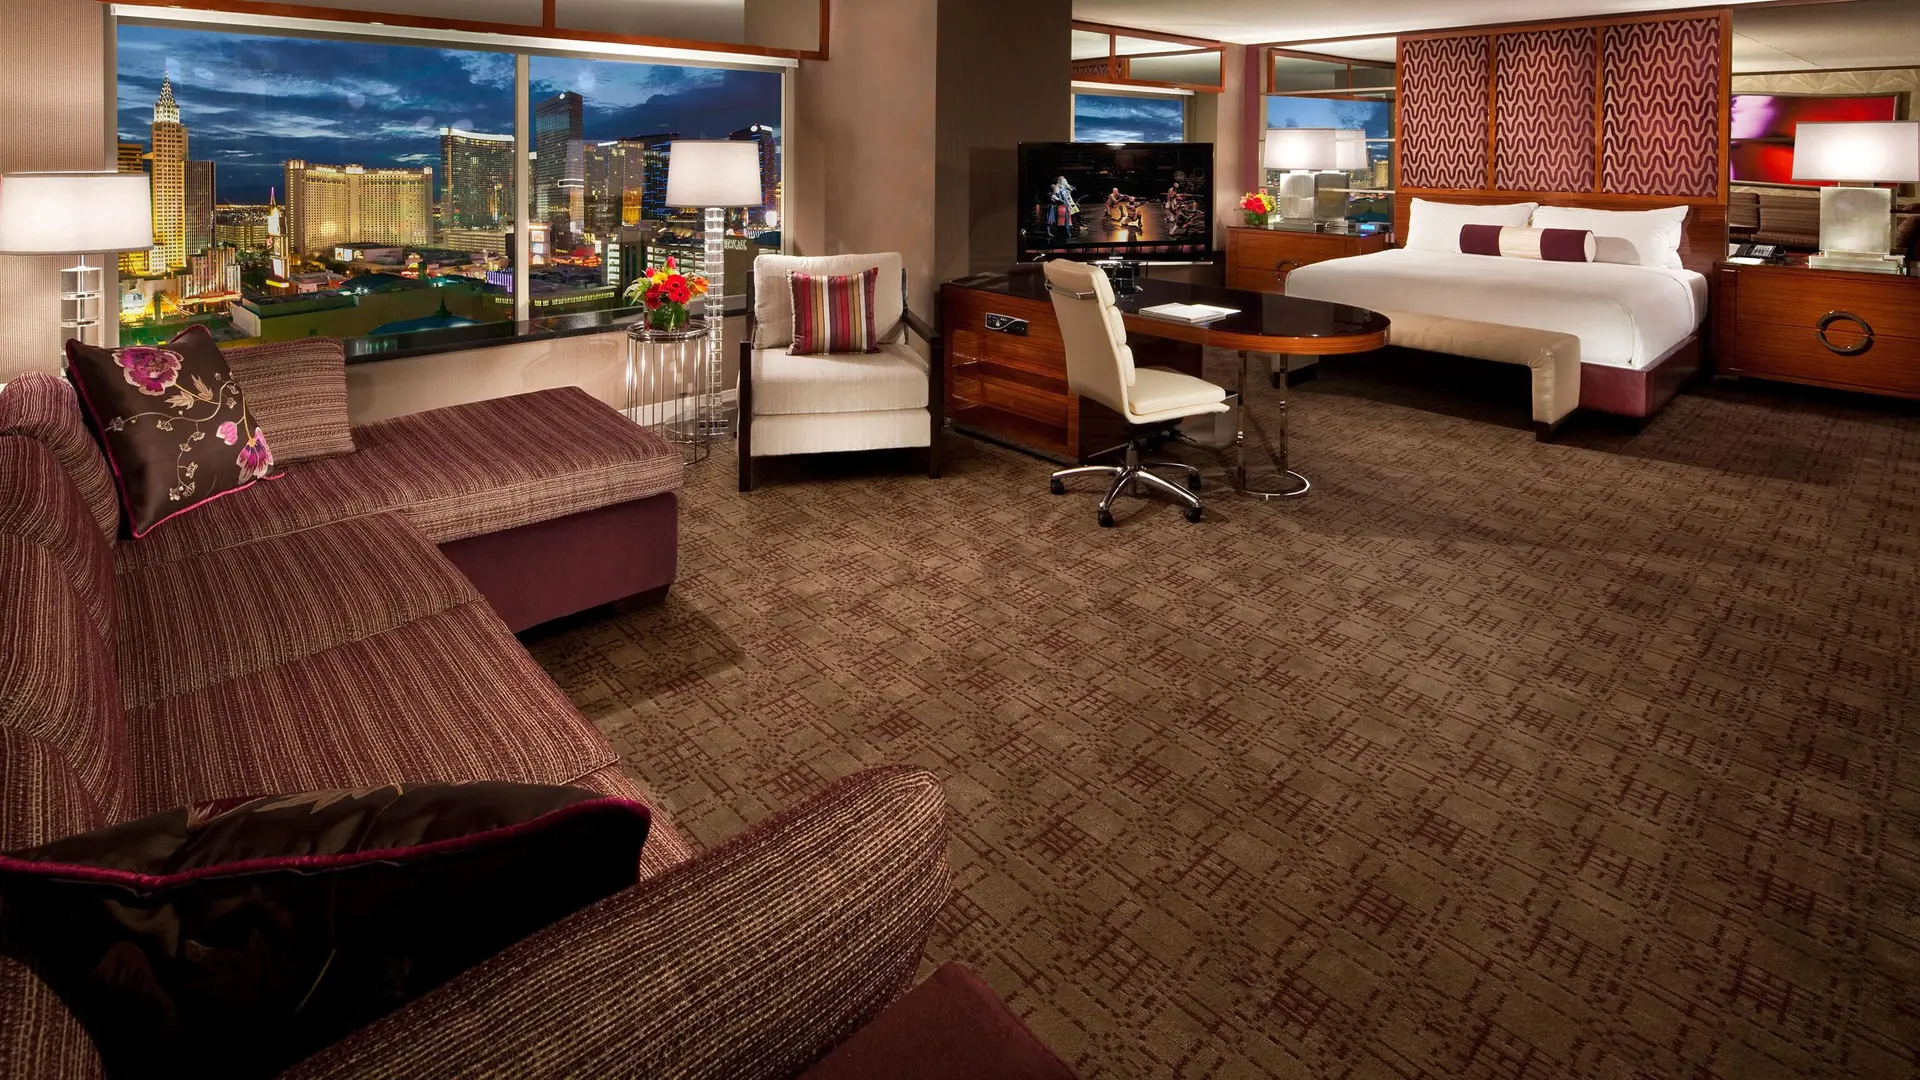 Room at the MGM Grand with red furniture, white beds, tv, and large windows showing the view of Las Vegas.